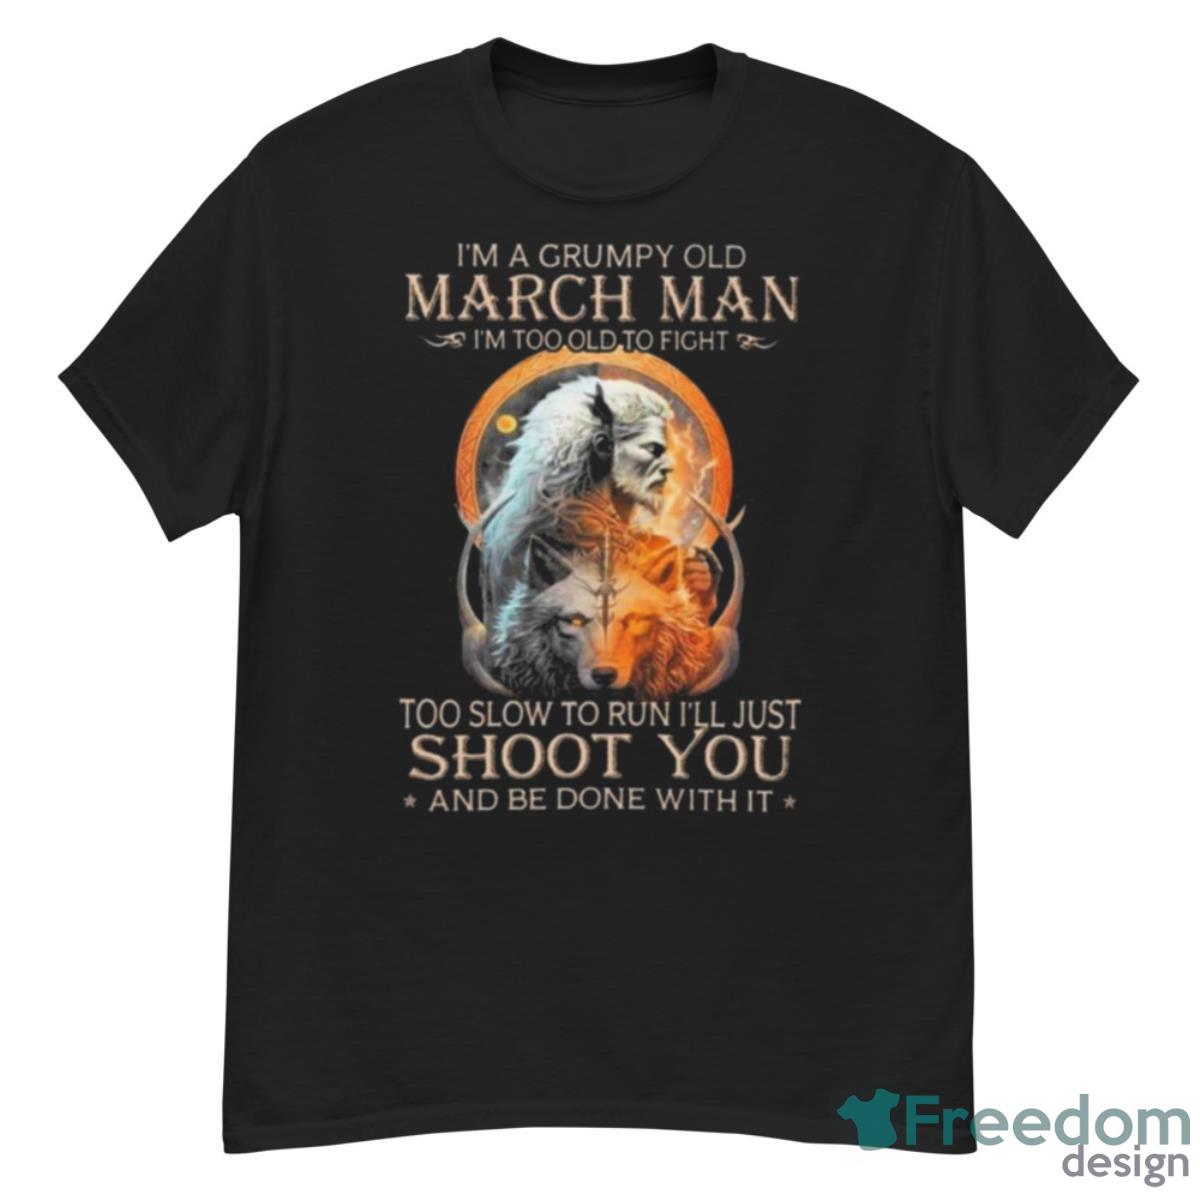 King Wolf I’m A Grumpy Old March Man I’m Too Old To Fight Too Slow To Run I’ll Just Shoot You And Be Done With It Shirt - G500 Men’s Classic T-Shirt